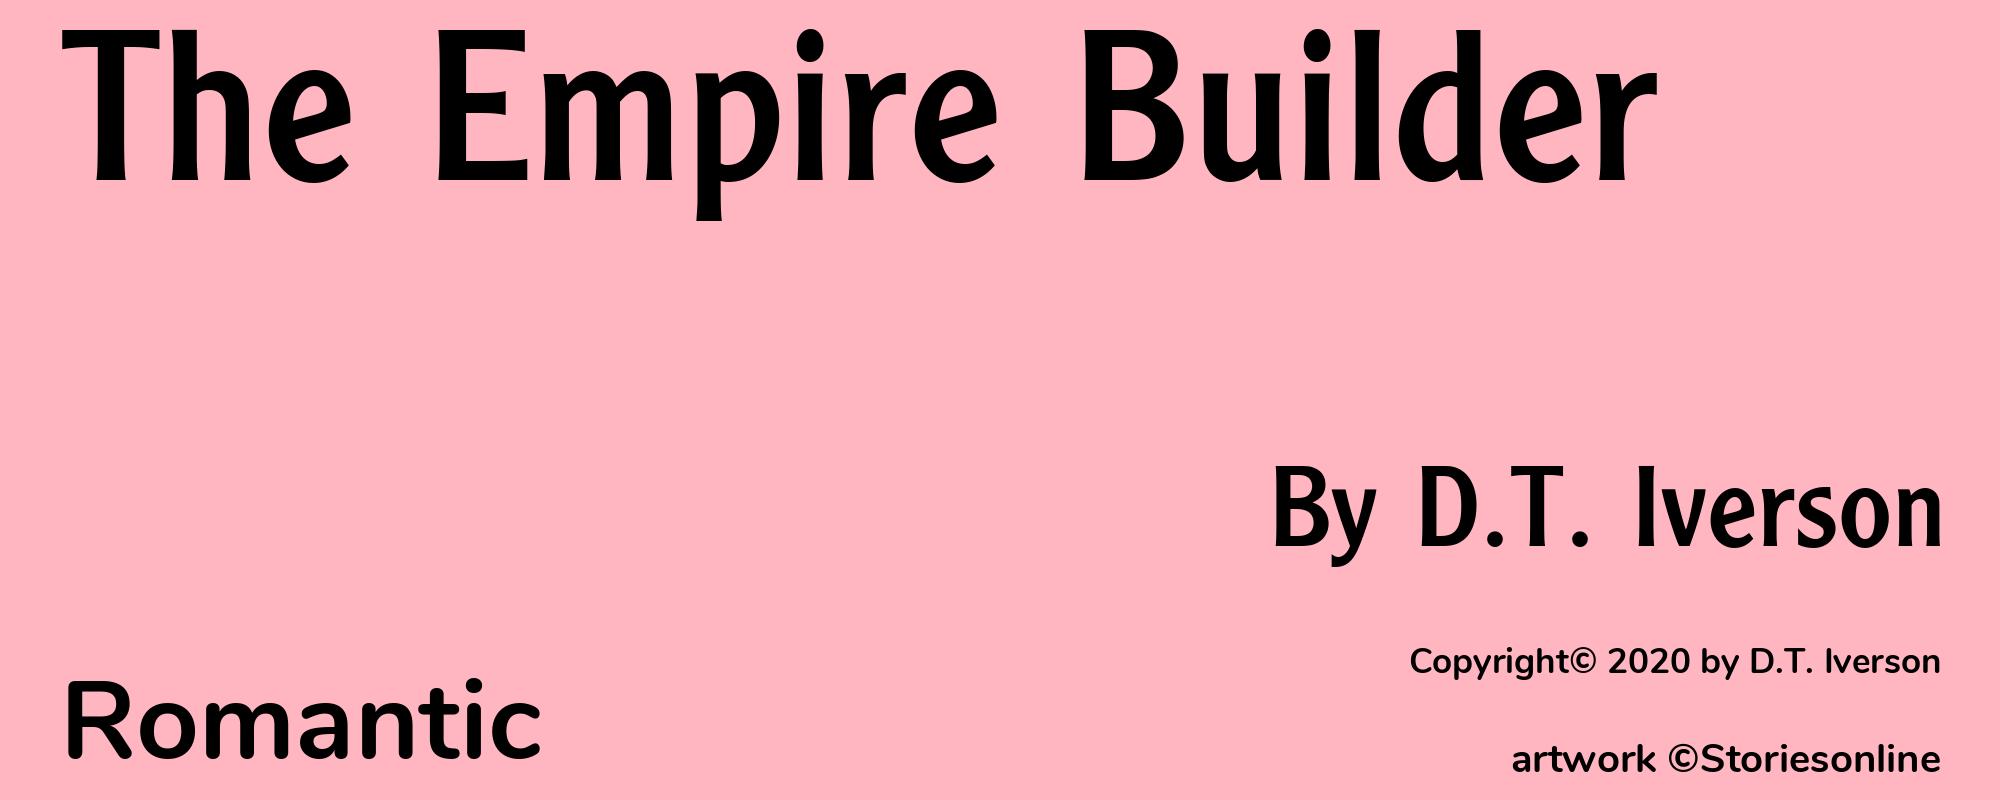 The Empire Builder - Cover